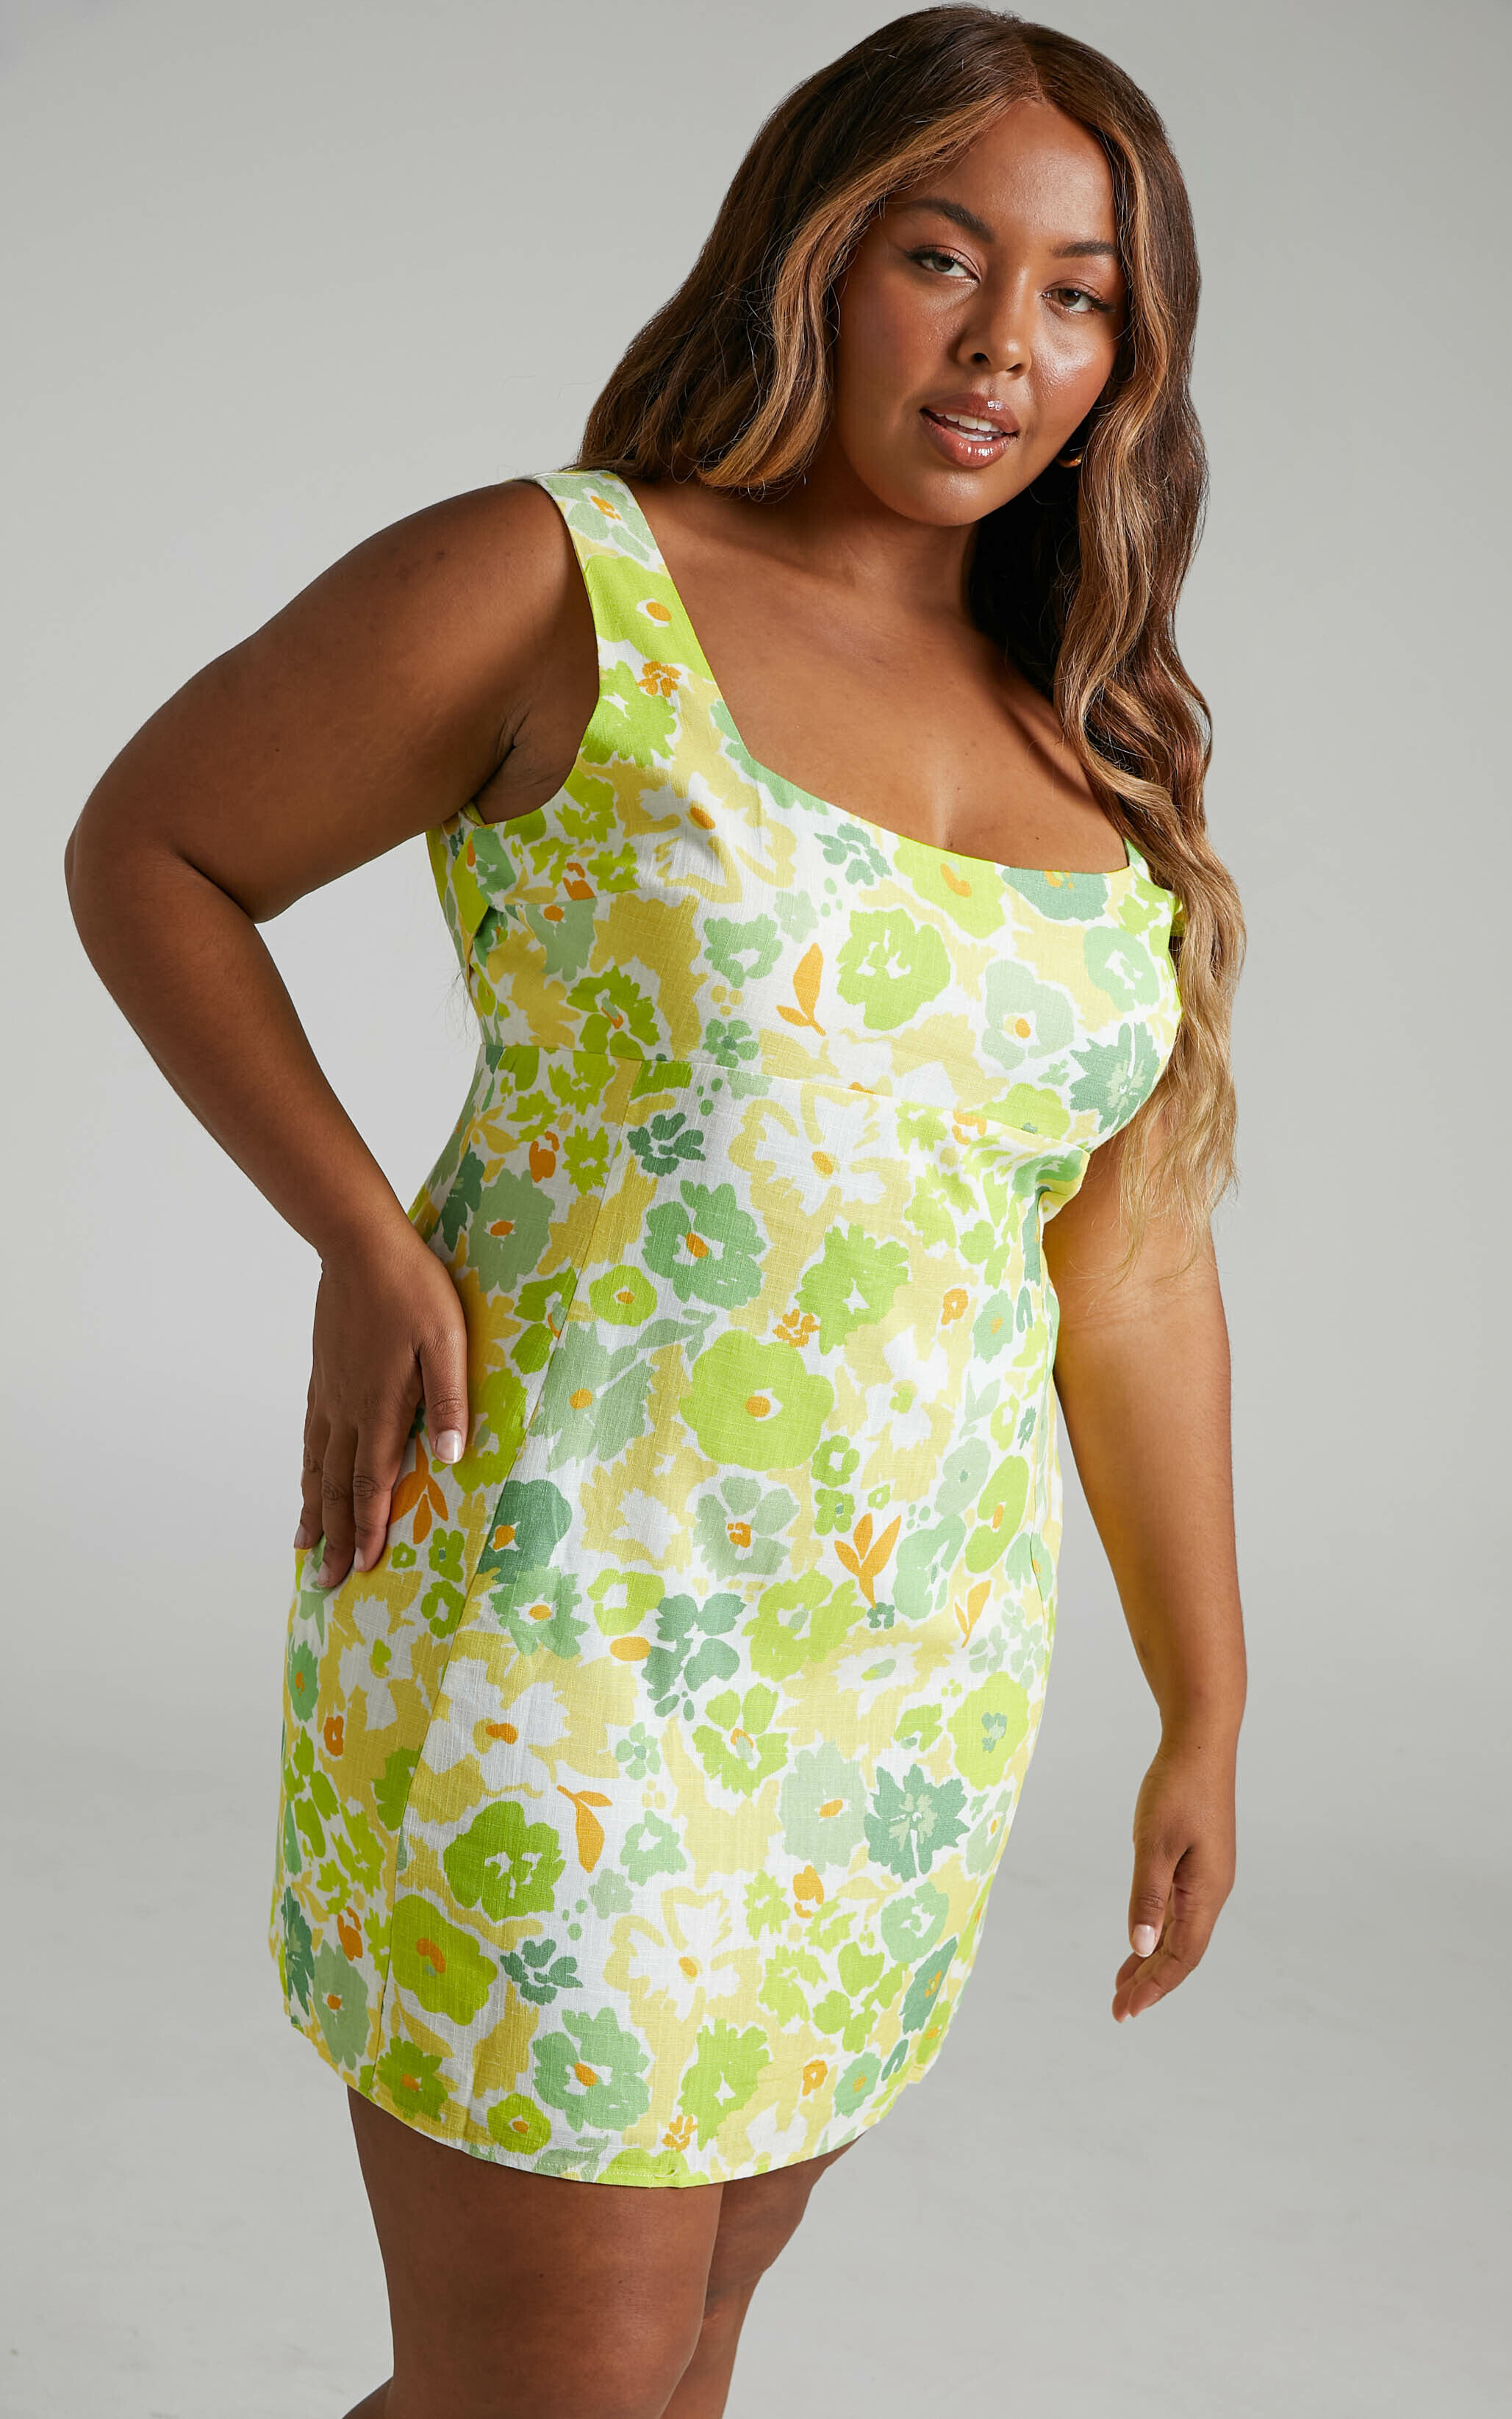 Nikoletta Square Neck Back Cut Out Mini Dress in Pine Lime Print - 04, GRN1, super-hi-res image number null